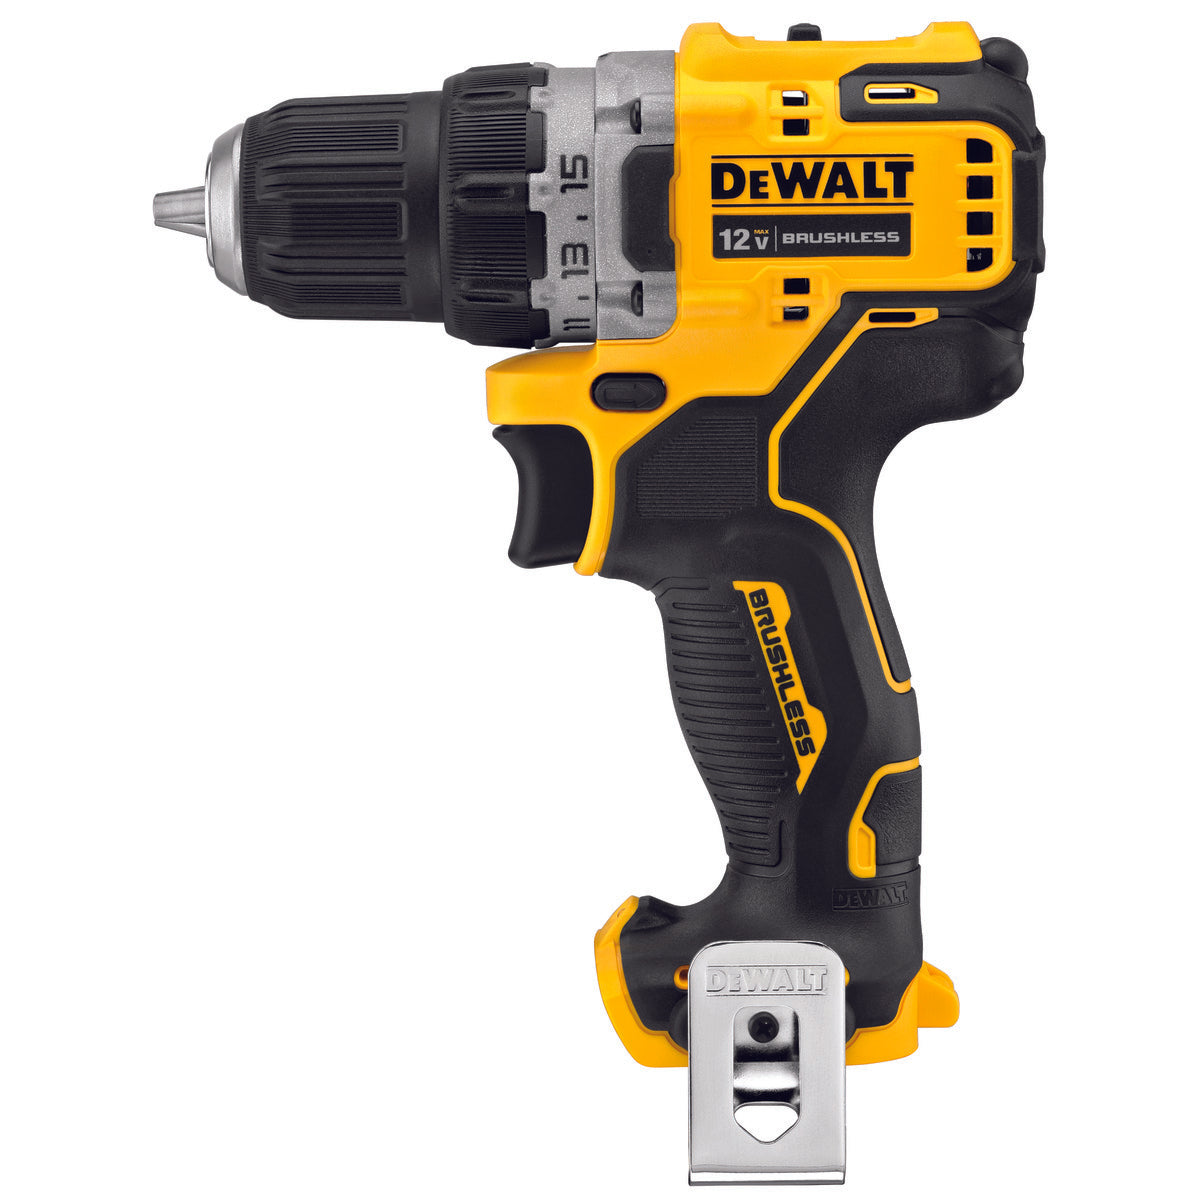 DEWALT DCD701B XTREME™ 12V MAX* BRUSHLESS 3/8 IN. CORDLESS DRILL/DRIVER (TOOL ONLY) - wise-line-tools